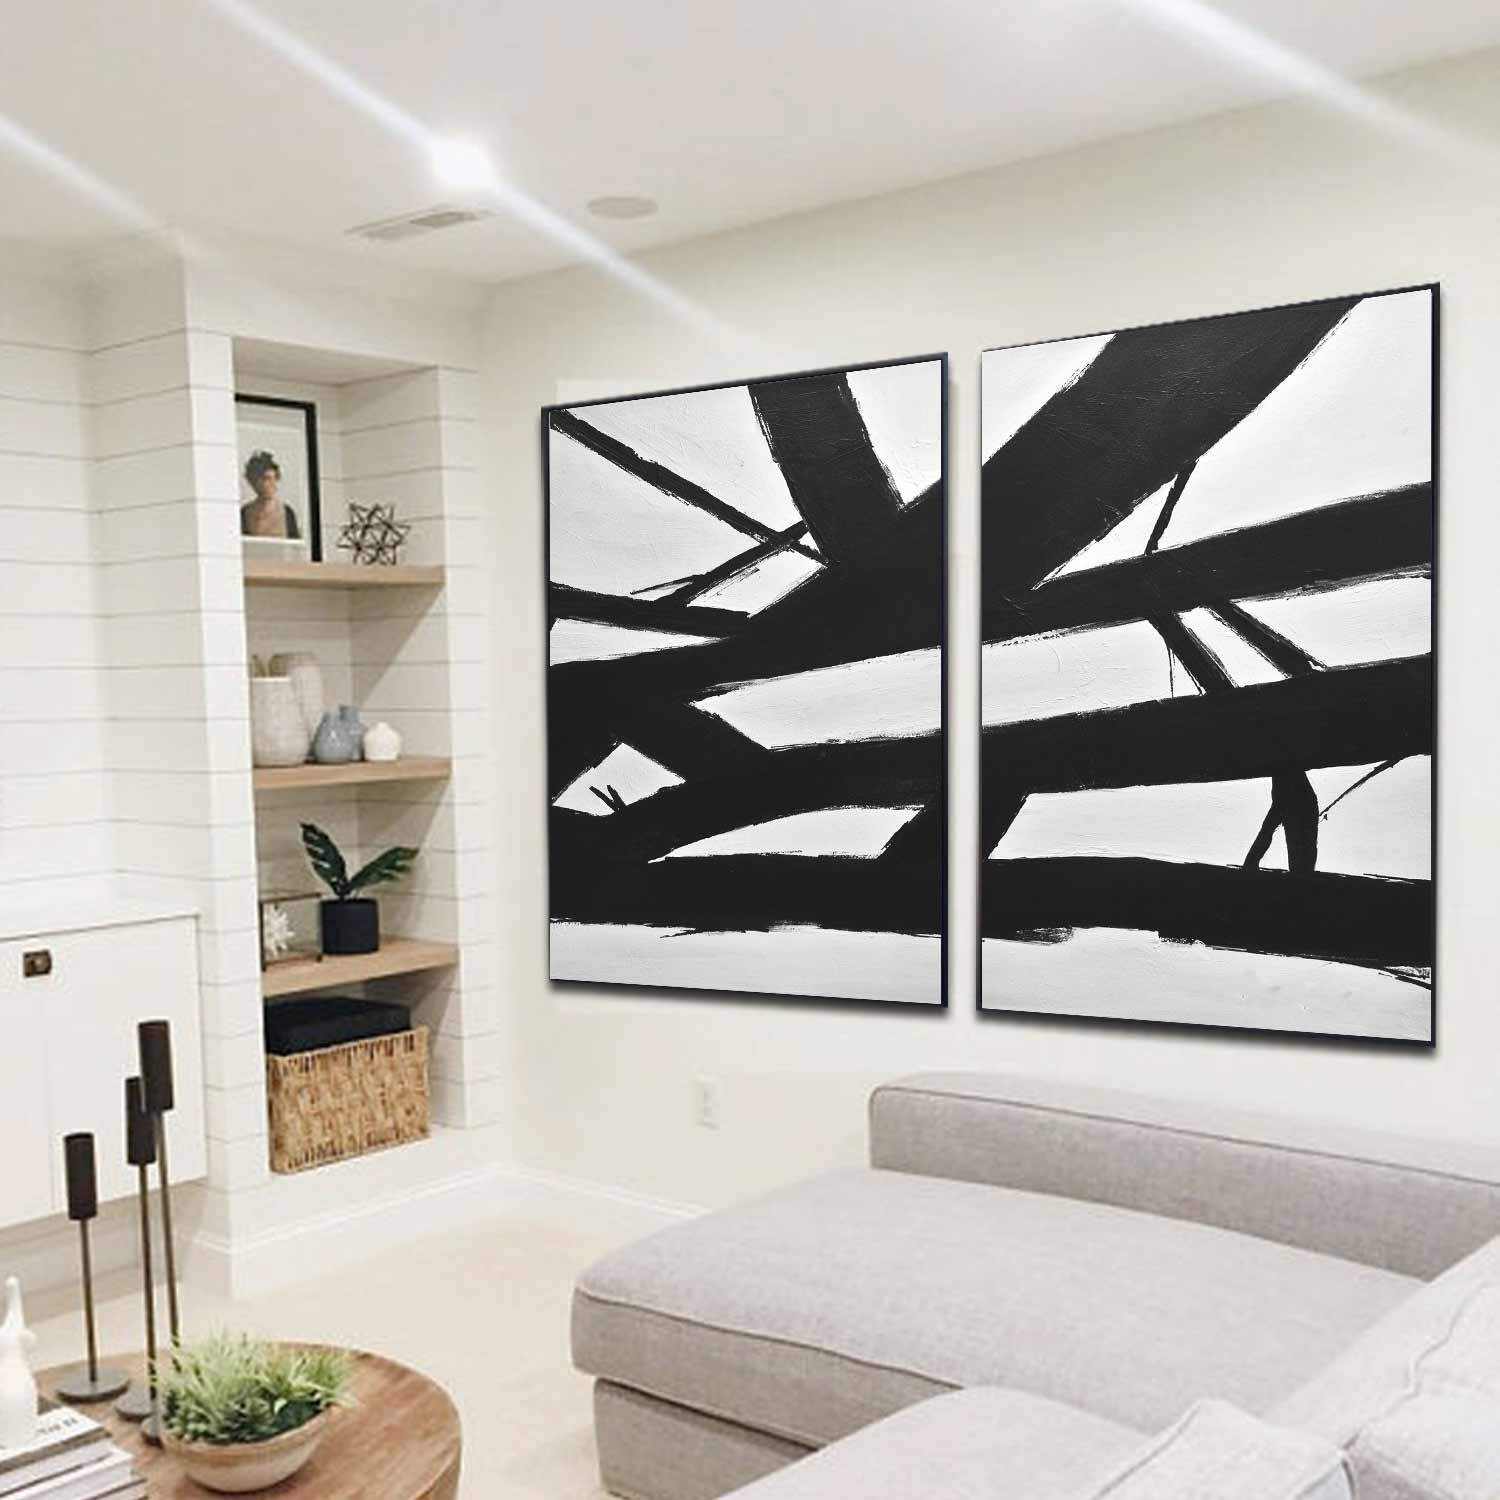 Set of 2 Black White Abstract "Crossing the Lines"